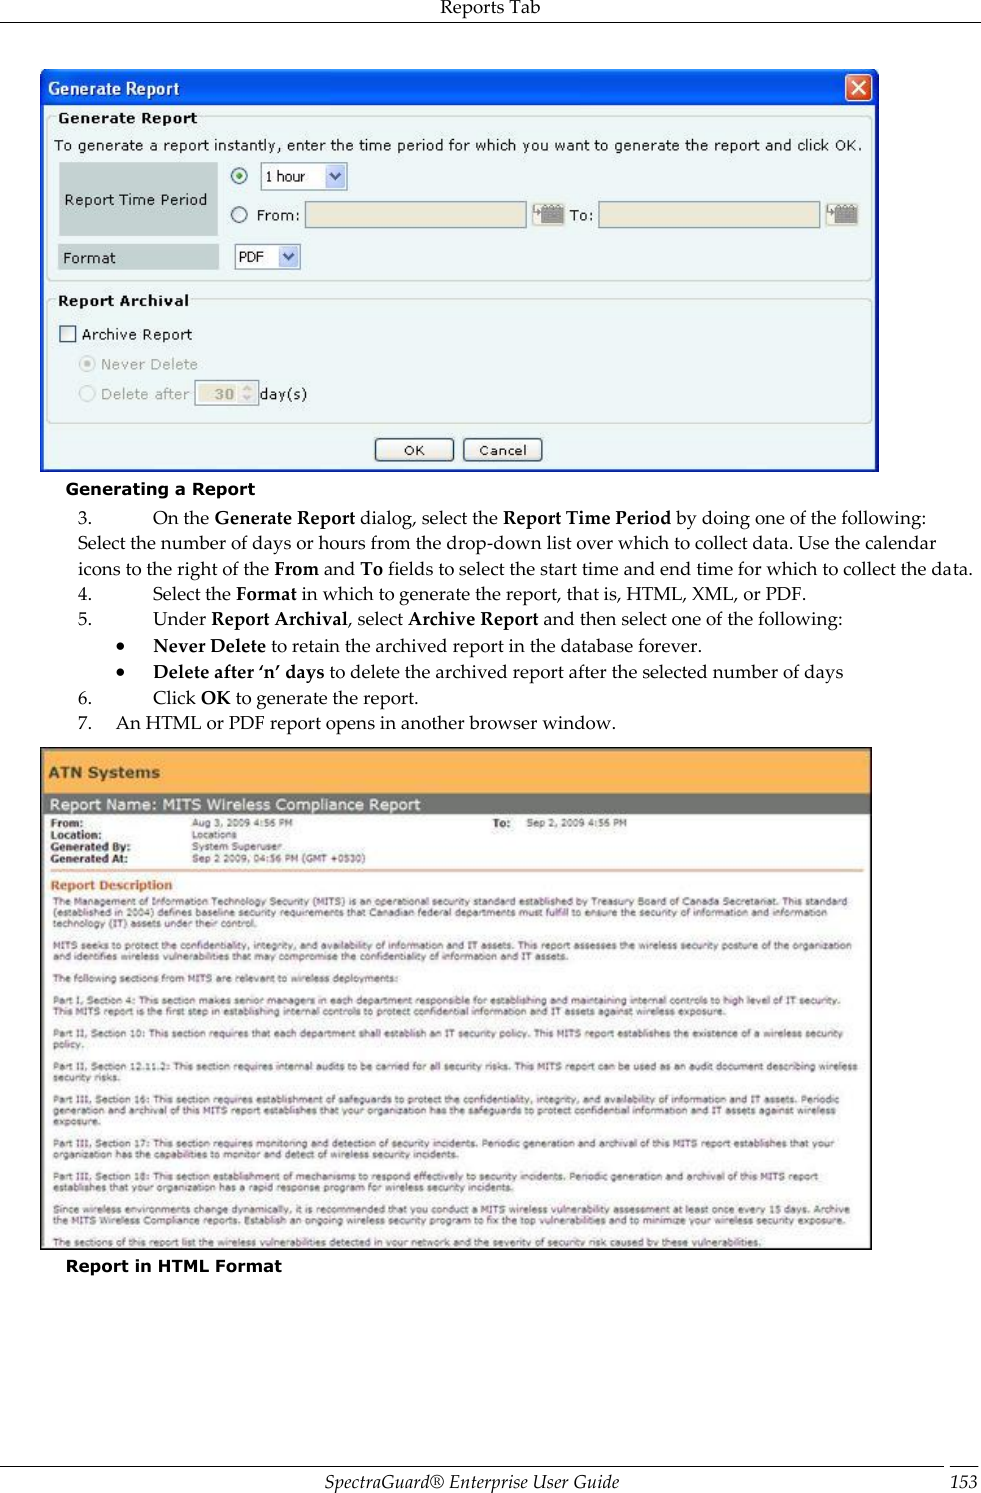 Reports Tab SpectraGuard®  Enterprise User Guide 153  Generating a Report 3. On the Generate Report dialog, select the Report Time Period by doing one of the following: Select the number of days or hours from the drop-down list over which to collect data. Use the calendar icons to the right of the From and To fields to select the start time and end time for which to collect the data. 4. Select the Format in which to generate the report, that is, HTML, XML, or PDF. 5. Under Report Archival, select Archive Report and then select one of the following:  Never Delete to retain the archived report in the database forever.  Delete after ‘n’ days to delete the archived report after the selected number of days 6. Click OK to generate the report. 7. An HTML or PDF report opens in another browser window.  Report in HTML Format 